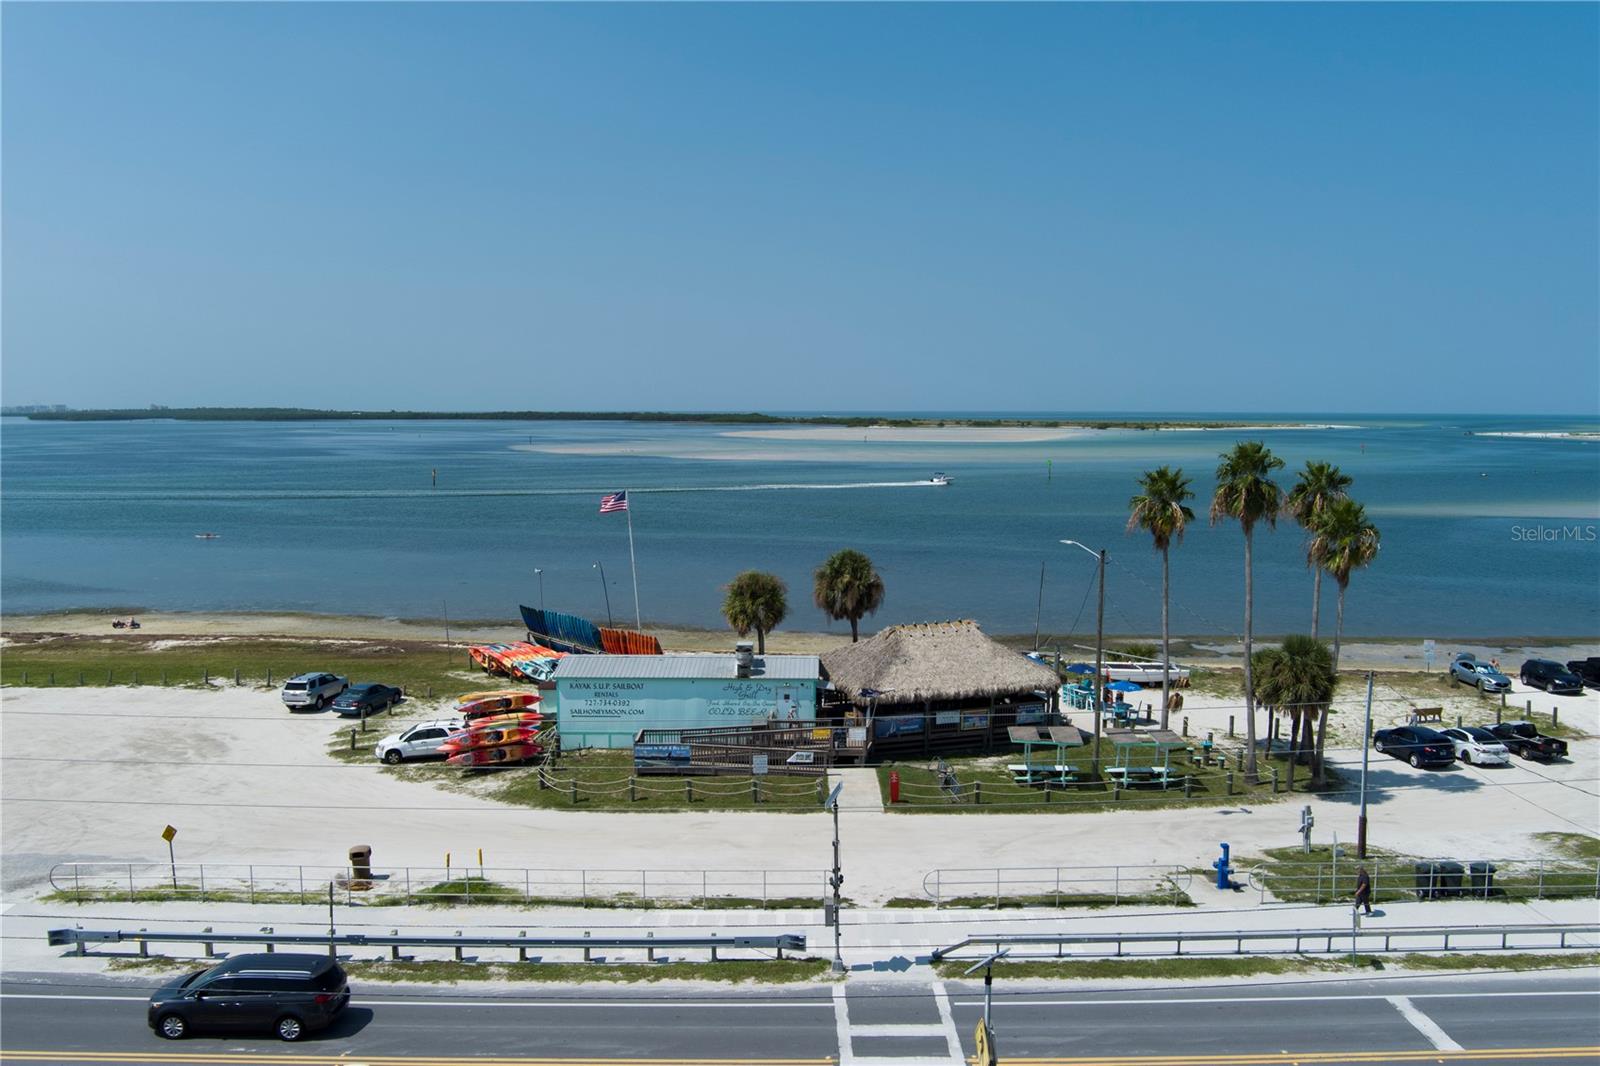 The popular High & Dry Grill located on the Dunedin Causeway. Great beach food and drinks. They also rent paddle boards, sailboats, and kayaks.